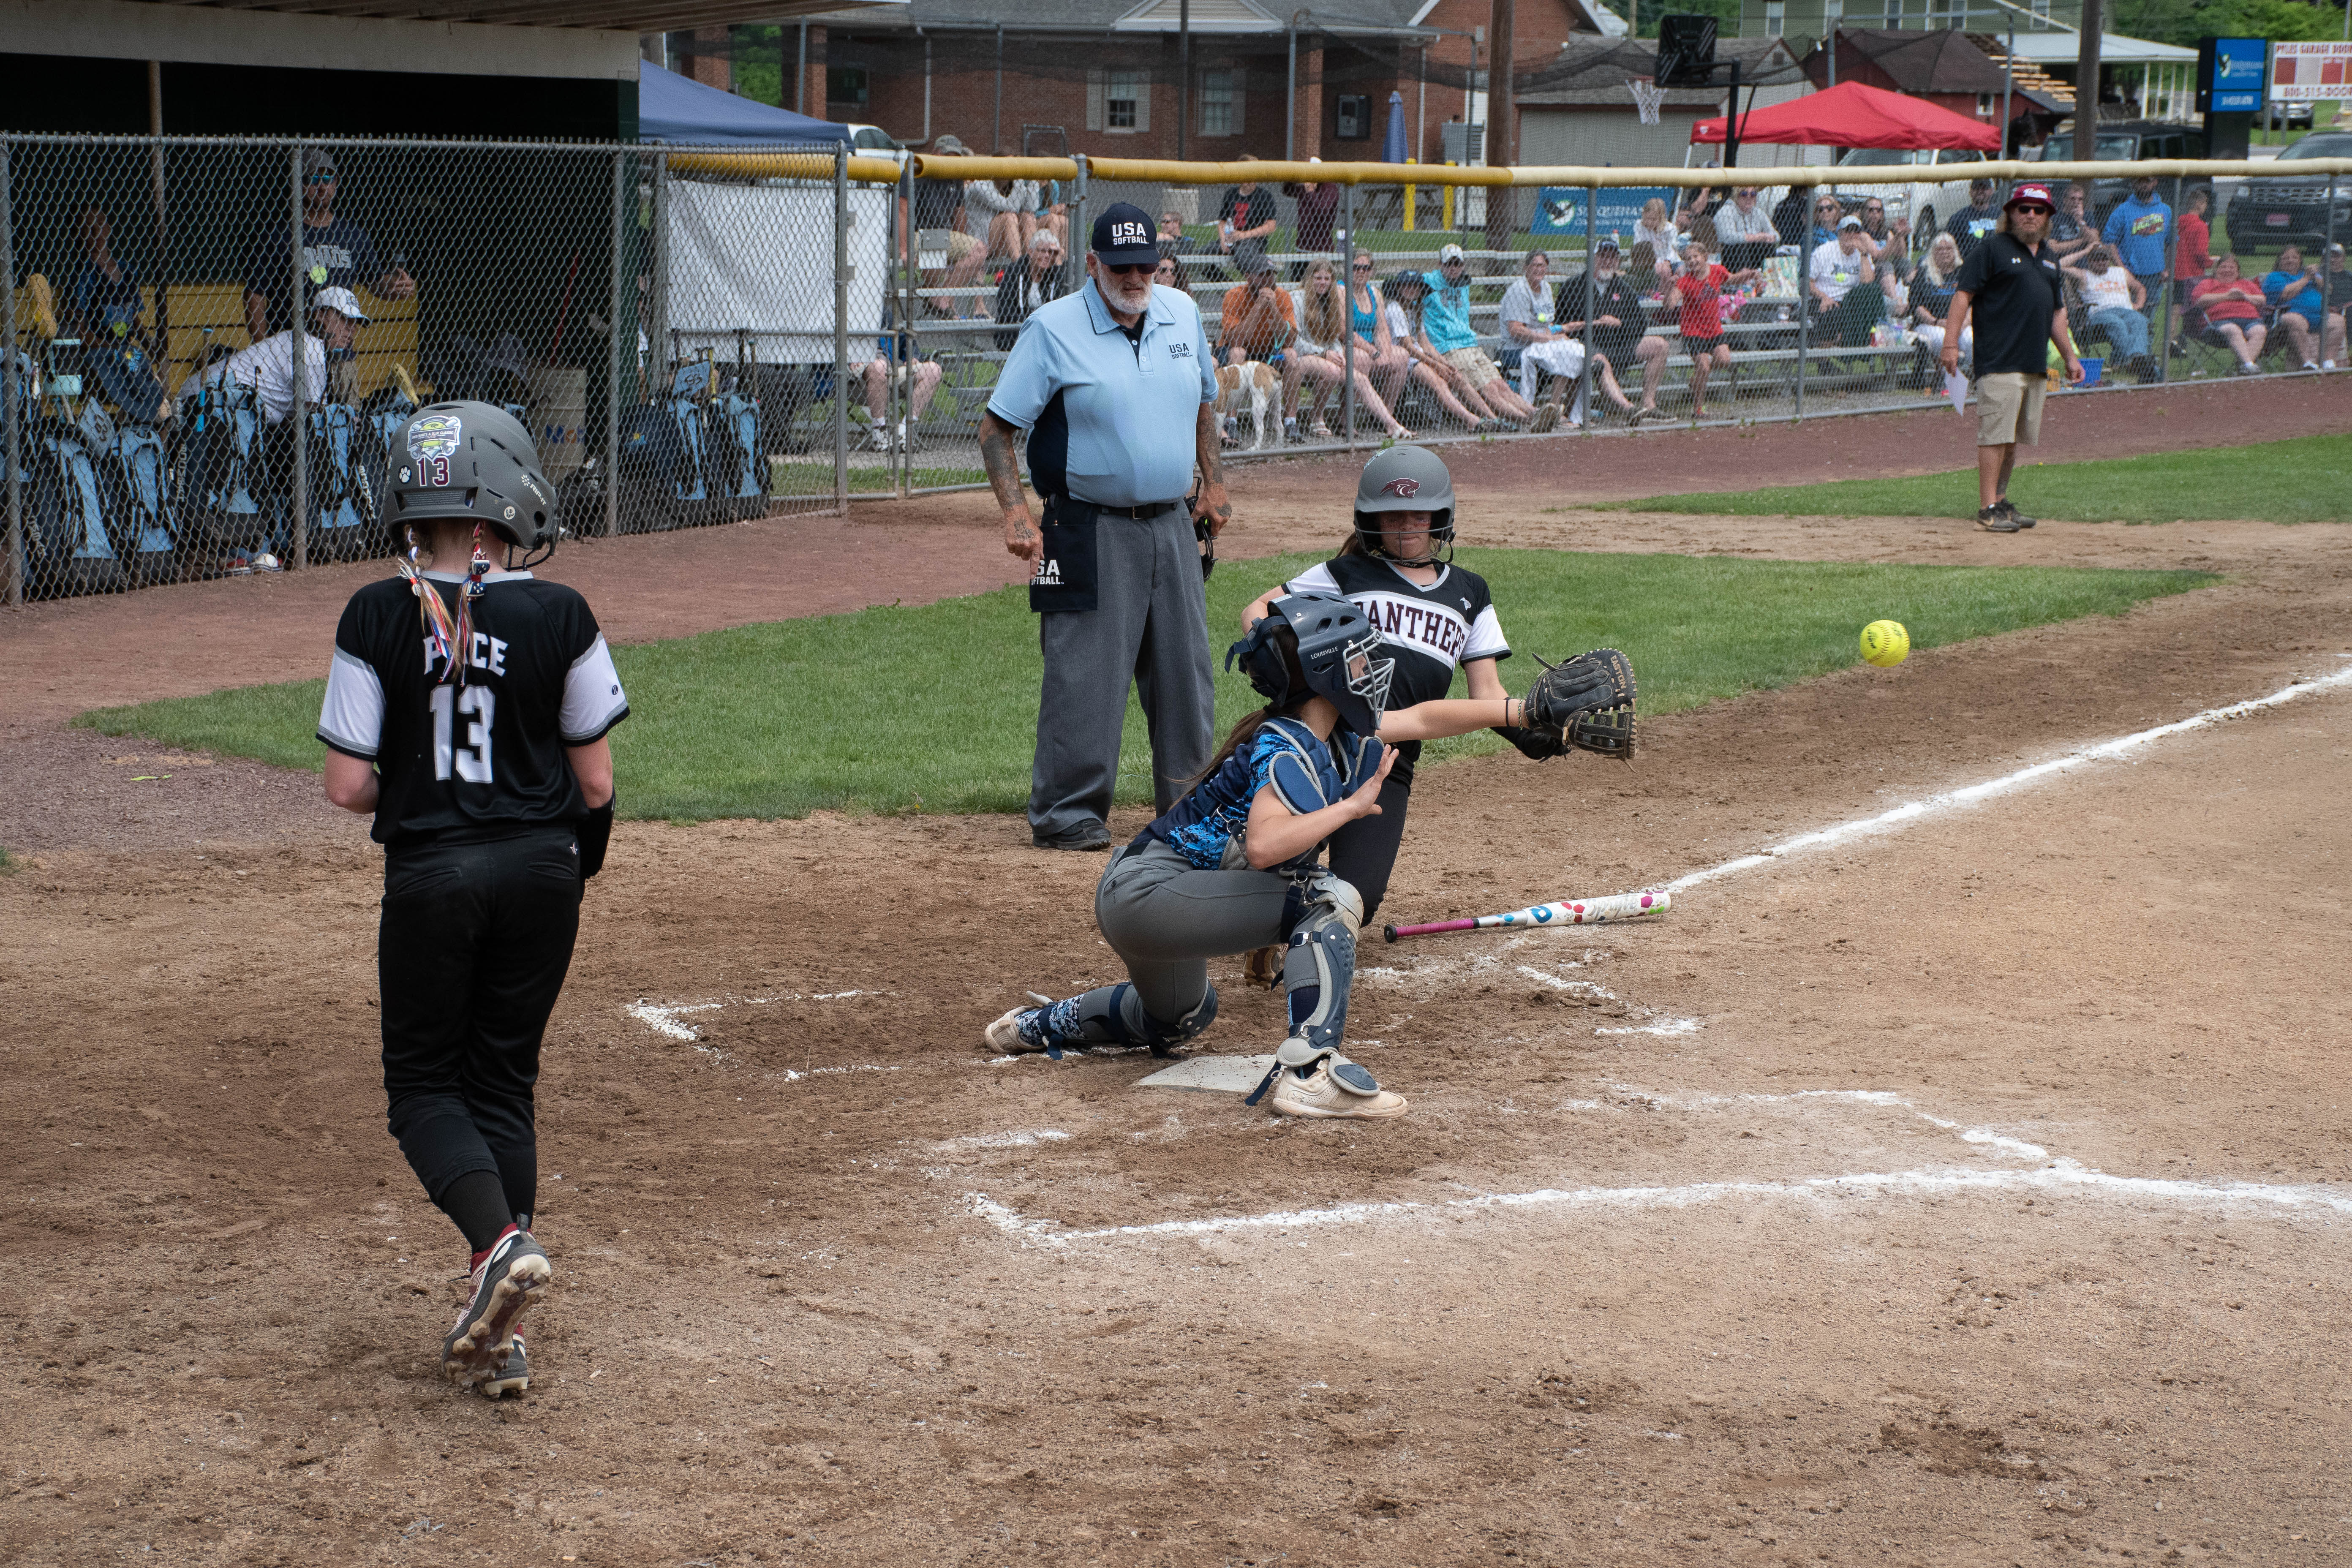 Runner sliding into home plate as catcher is about to catch ball.